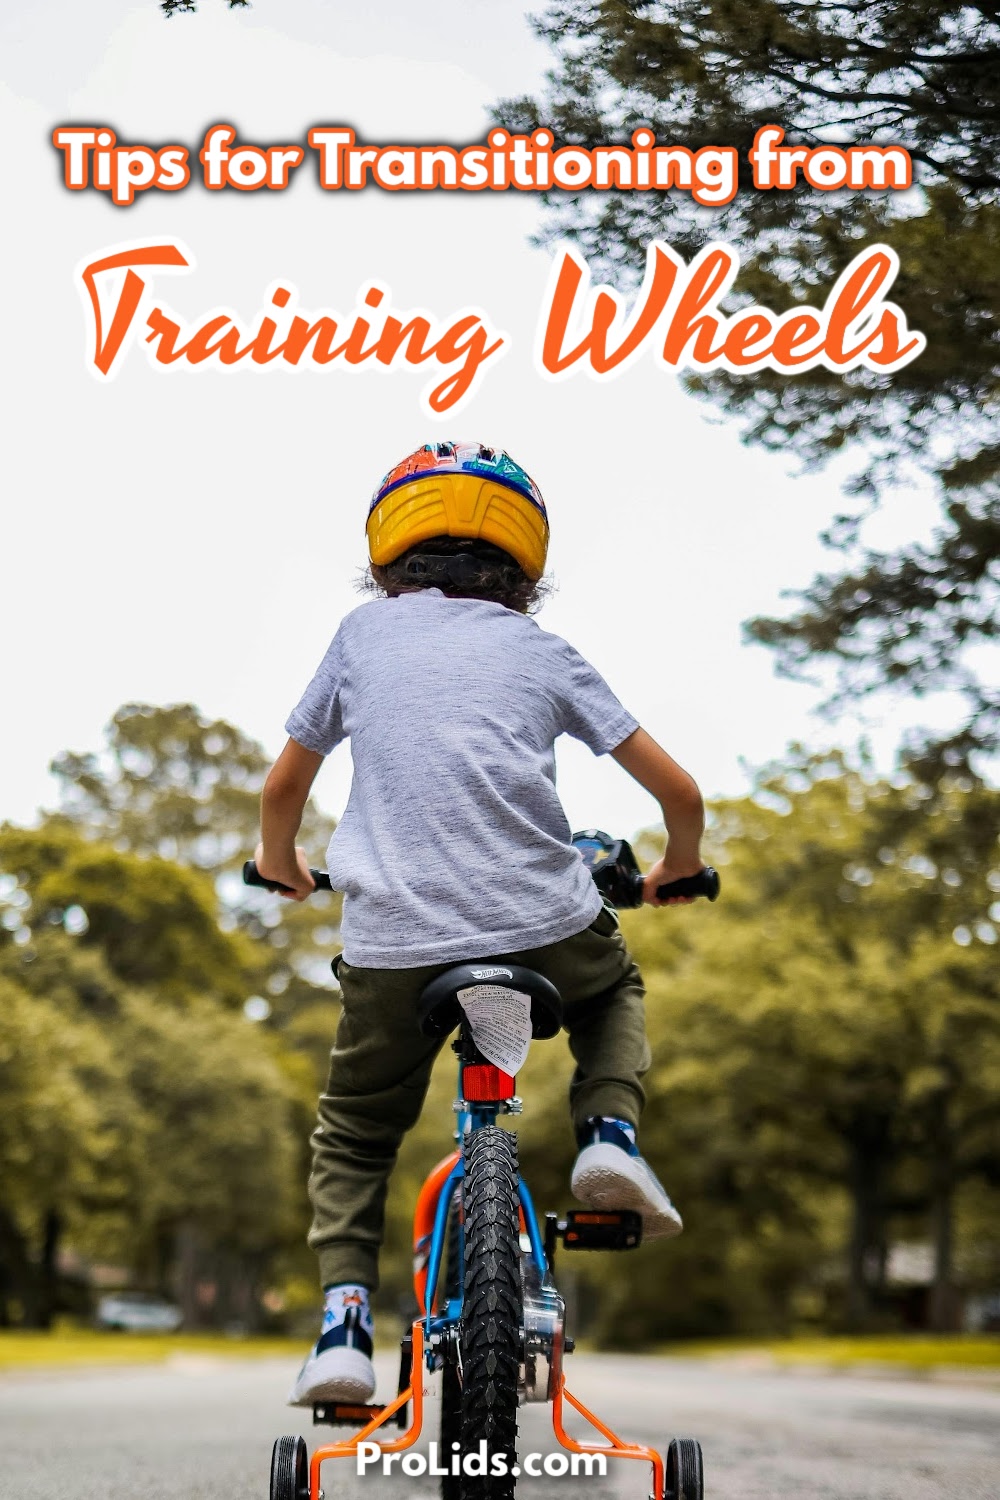 Parents can use some simple tips to transition from training wheels to help their children make the jump from four to two wheels.